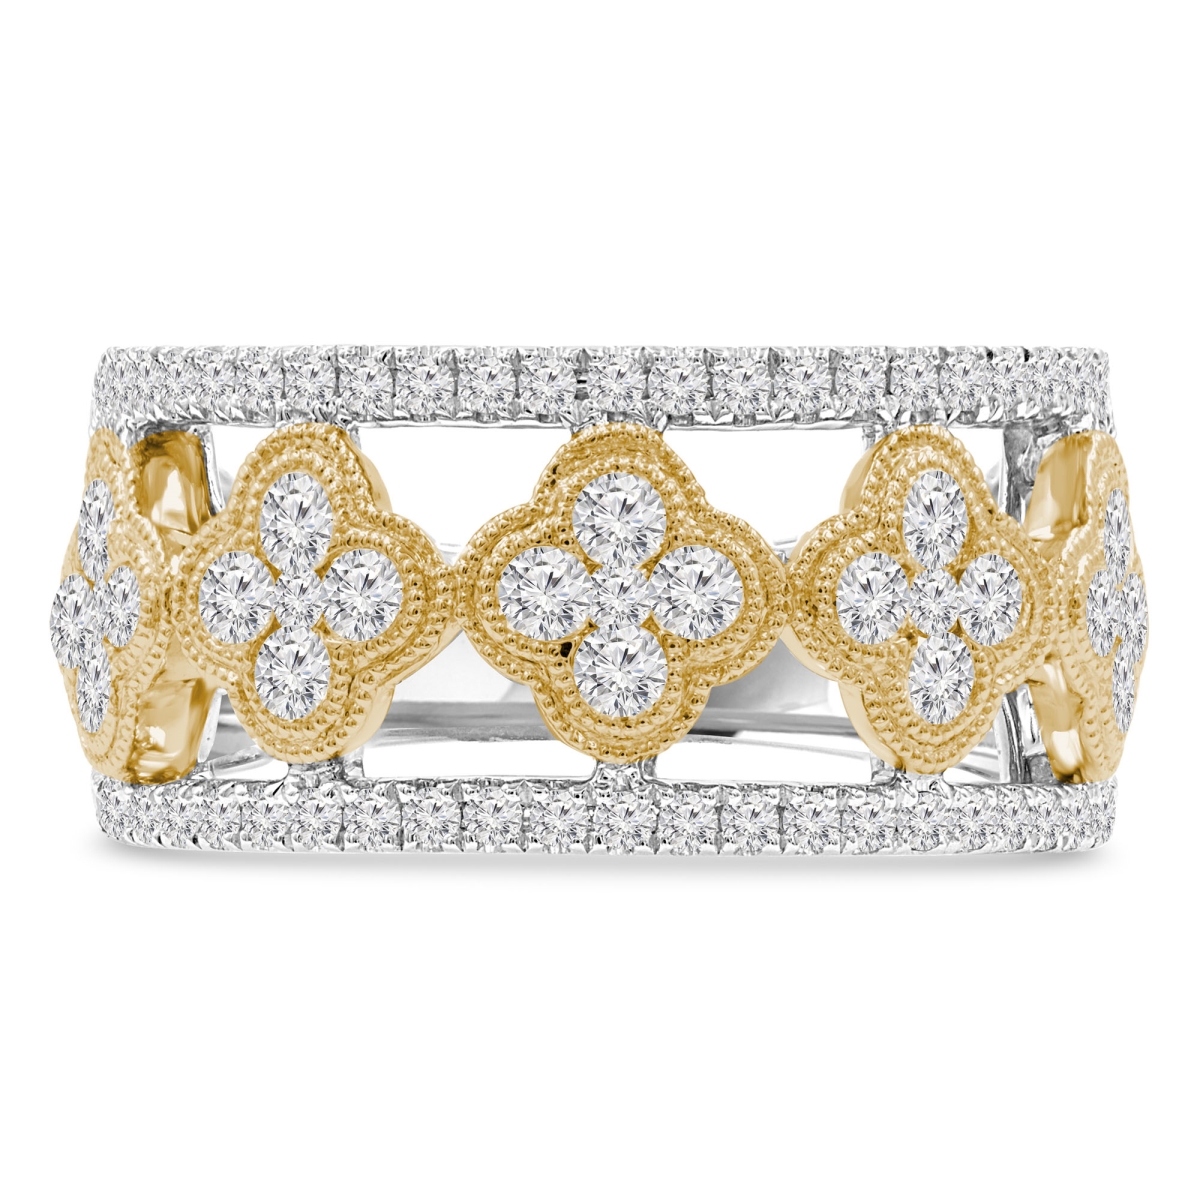 Picture of Majesty Diamonds MDR210140-5 1 CTW Round Diamond Cocktail Ring in 14K Two-Tone Gold - Size 5